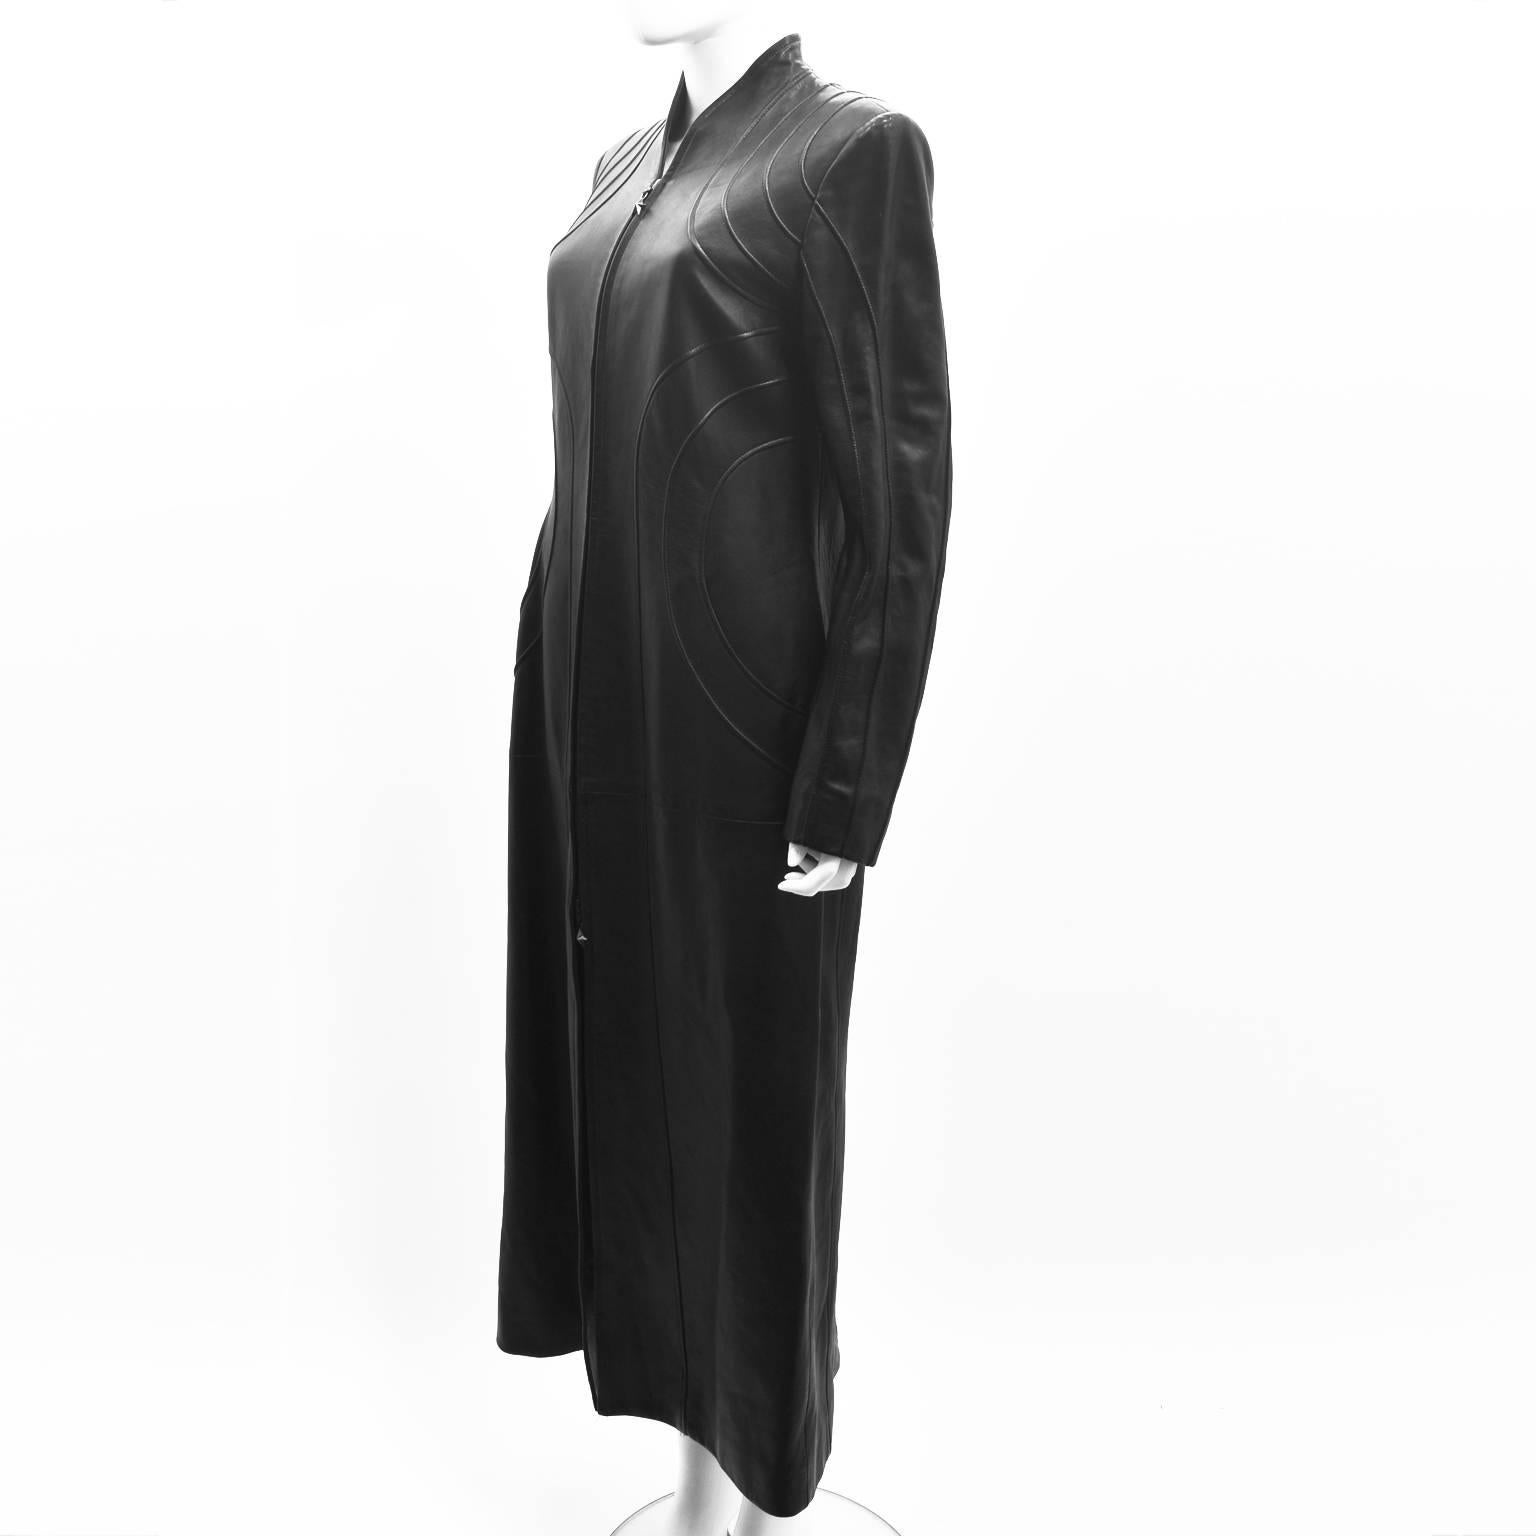 A stunning and rare black leather long coat by Thierry Mugler from the 1990’s. The coat has a long length and a slim, fitted shape with zip fastening and no collar. It also features decorative geometric seam details across the front and back of the